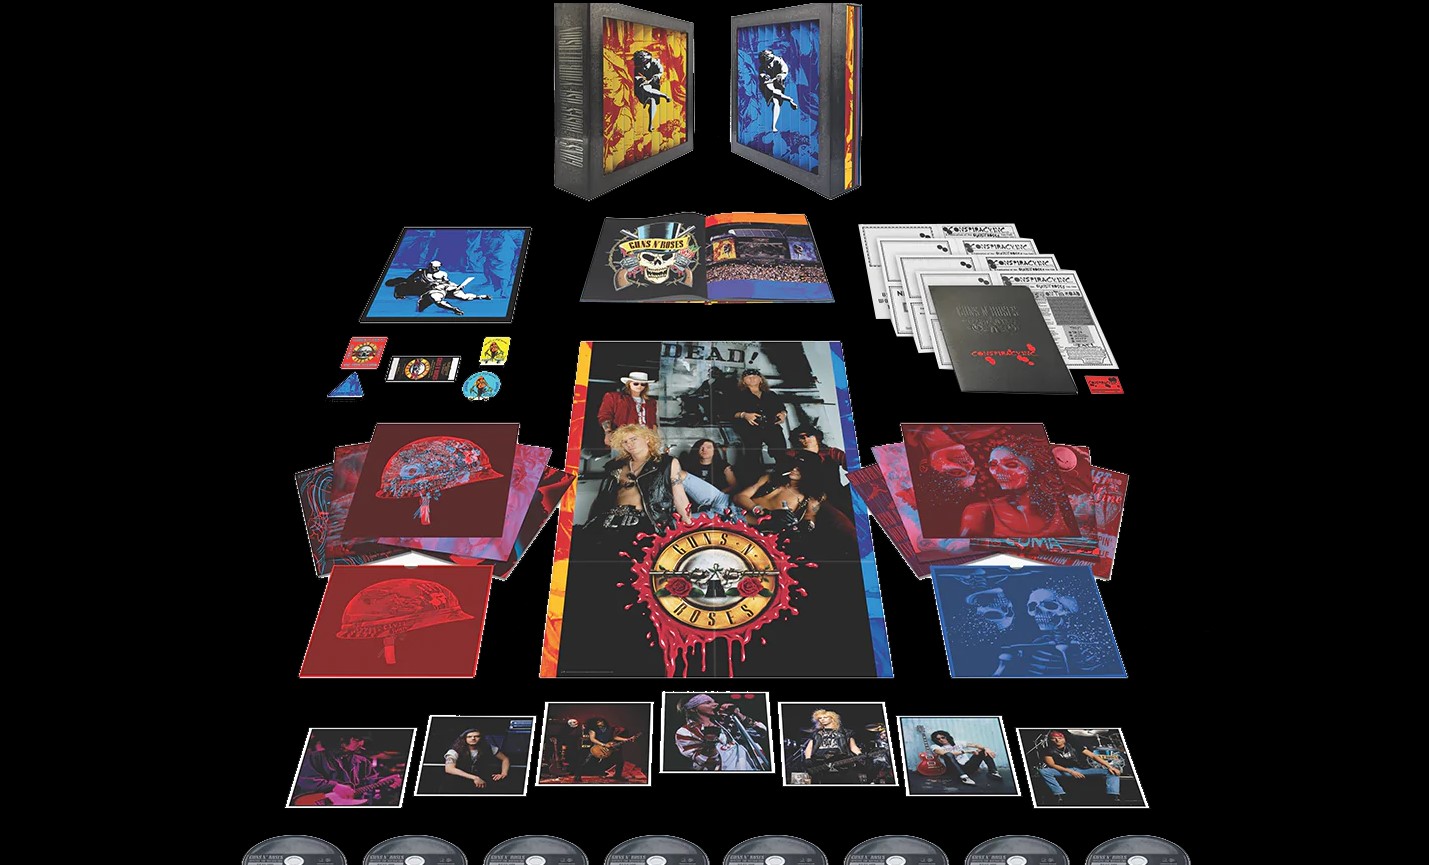 GUNS N' ROSES TO RELEASE "USE YOUR ILLUSION I & II" SUPER DELUXE 7CD + BLU-RAY BOX SET